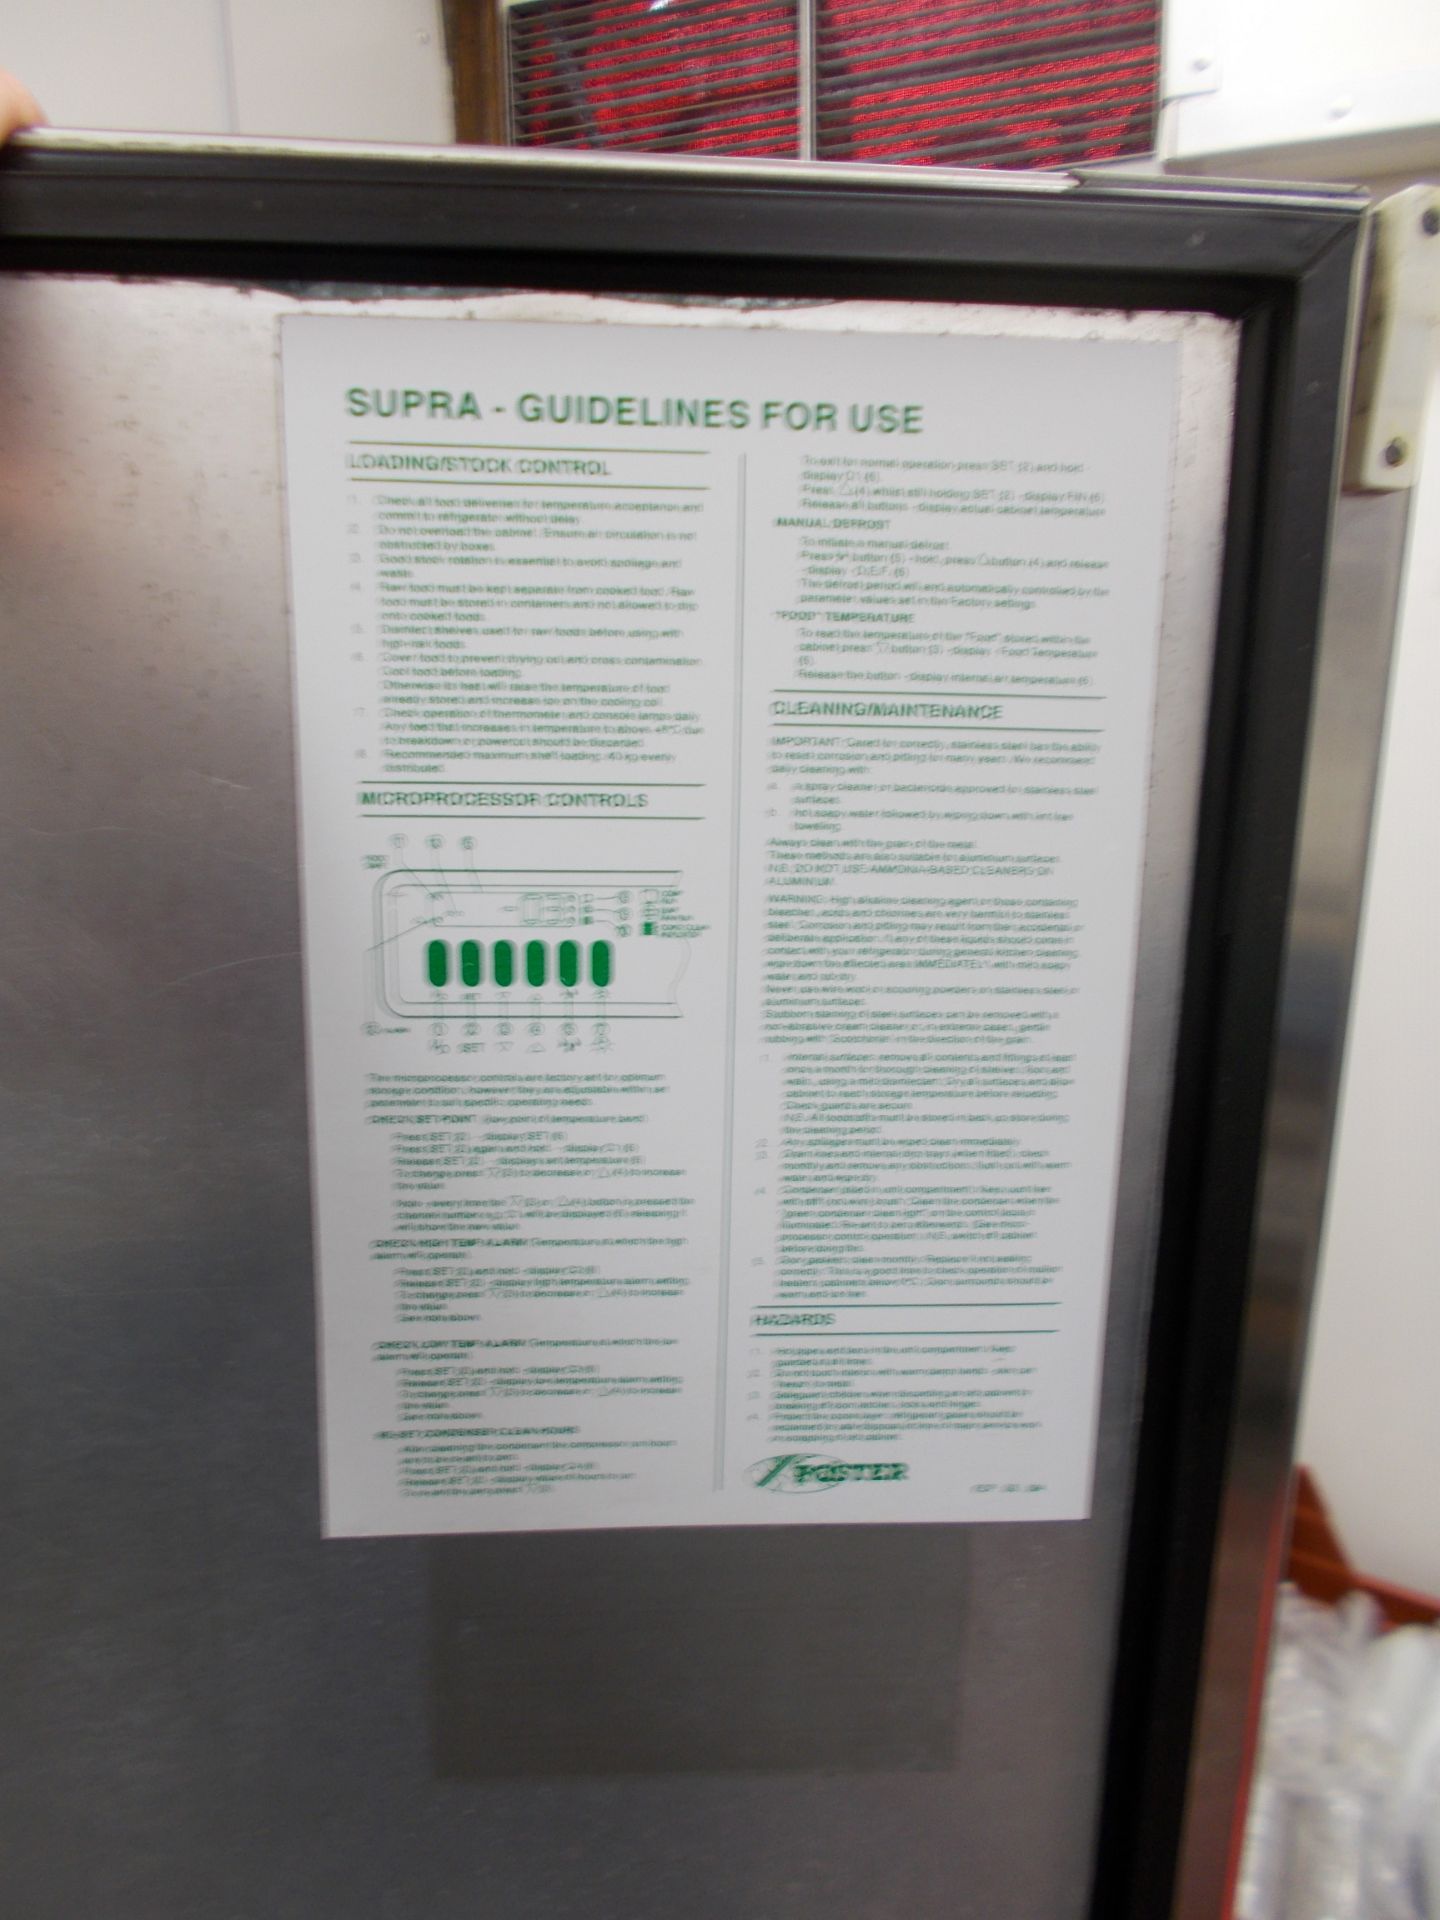 Foster Supra upright commercial refrigerator. Dimensions: H: 6ft 9 x D: 2ft 8 x W: 2ft 4 - Image 2 of 3